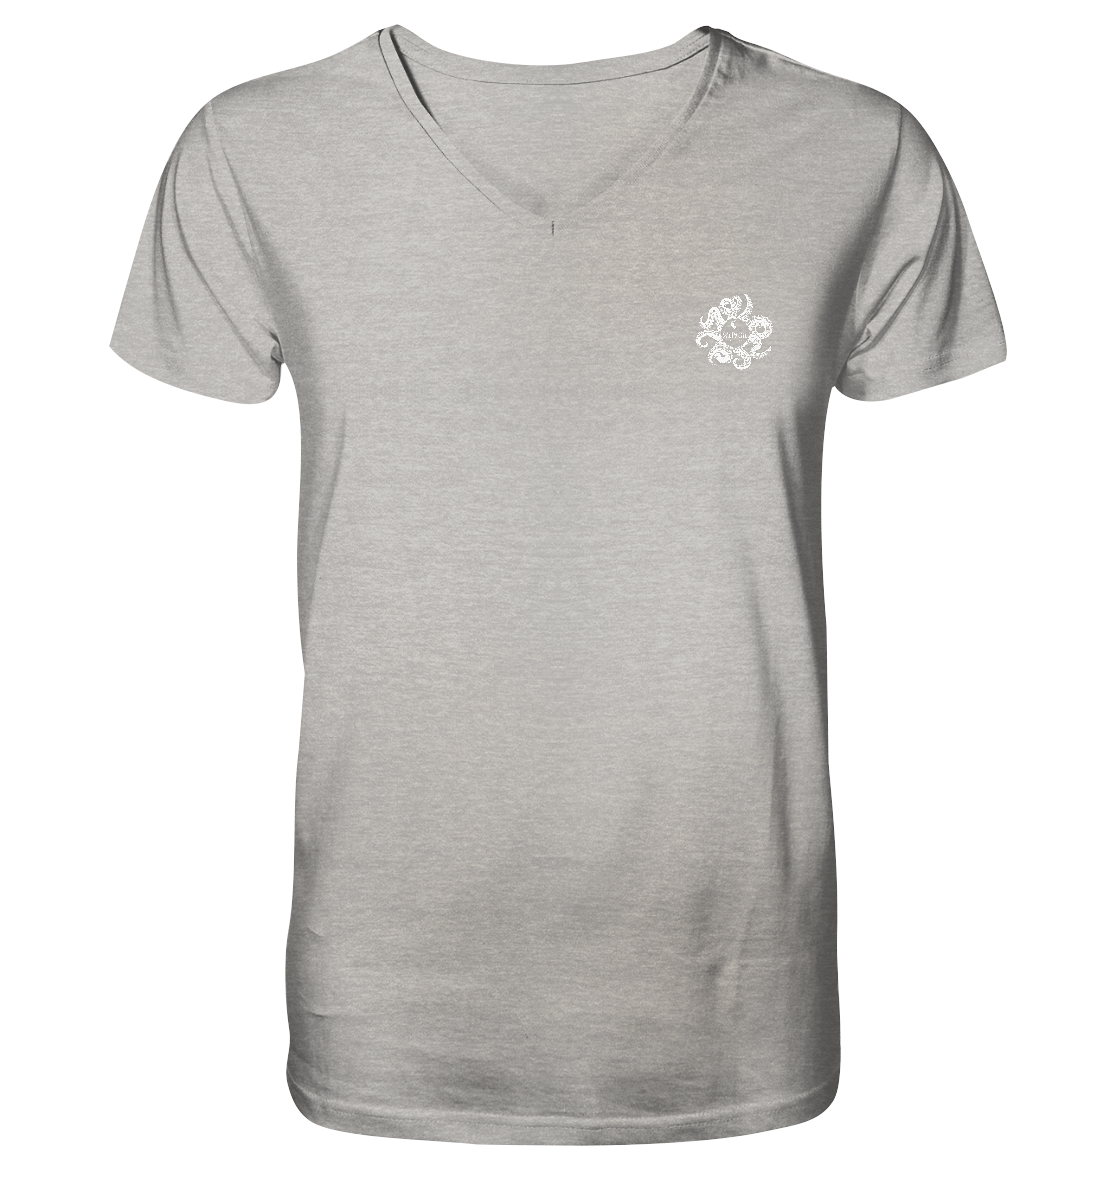 Salty Life "Under the Curse of the Octopus" - Mens Organic V-Neck Shirt